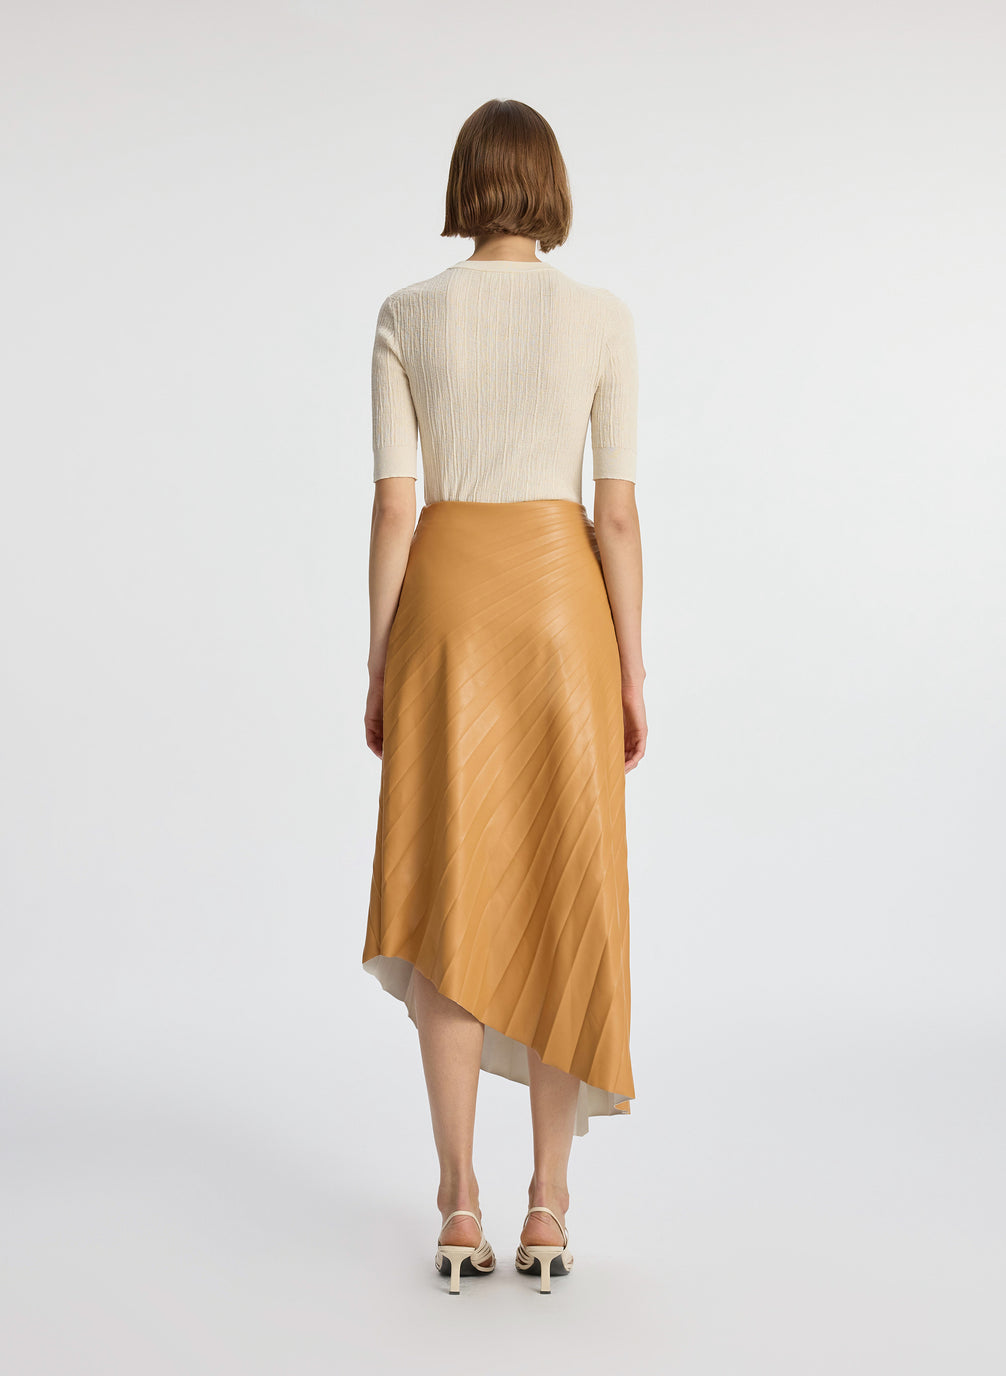 back view of a woman wearing beige shirt with brown pleated vegan leather midi skirt